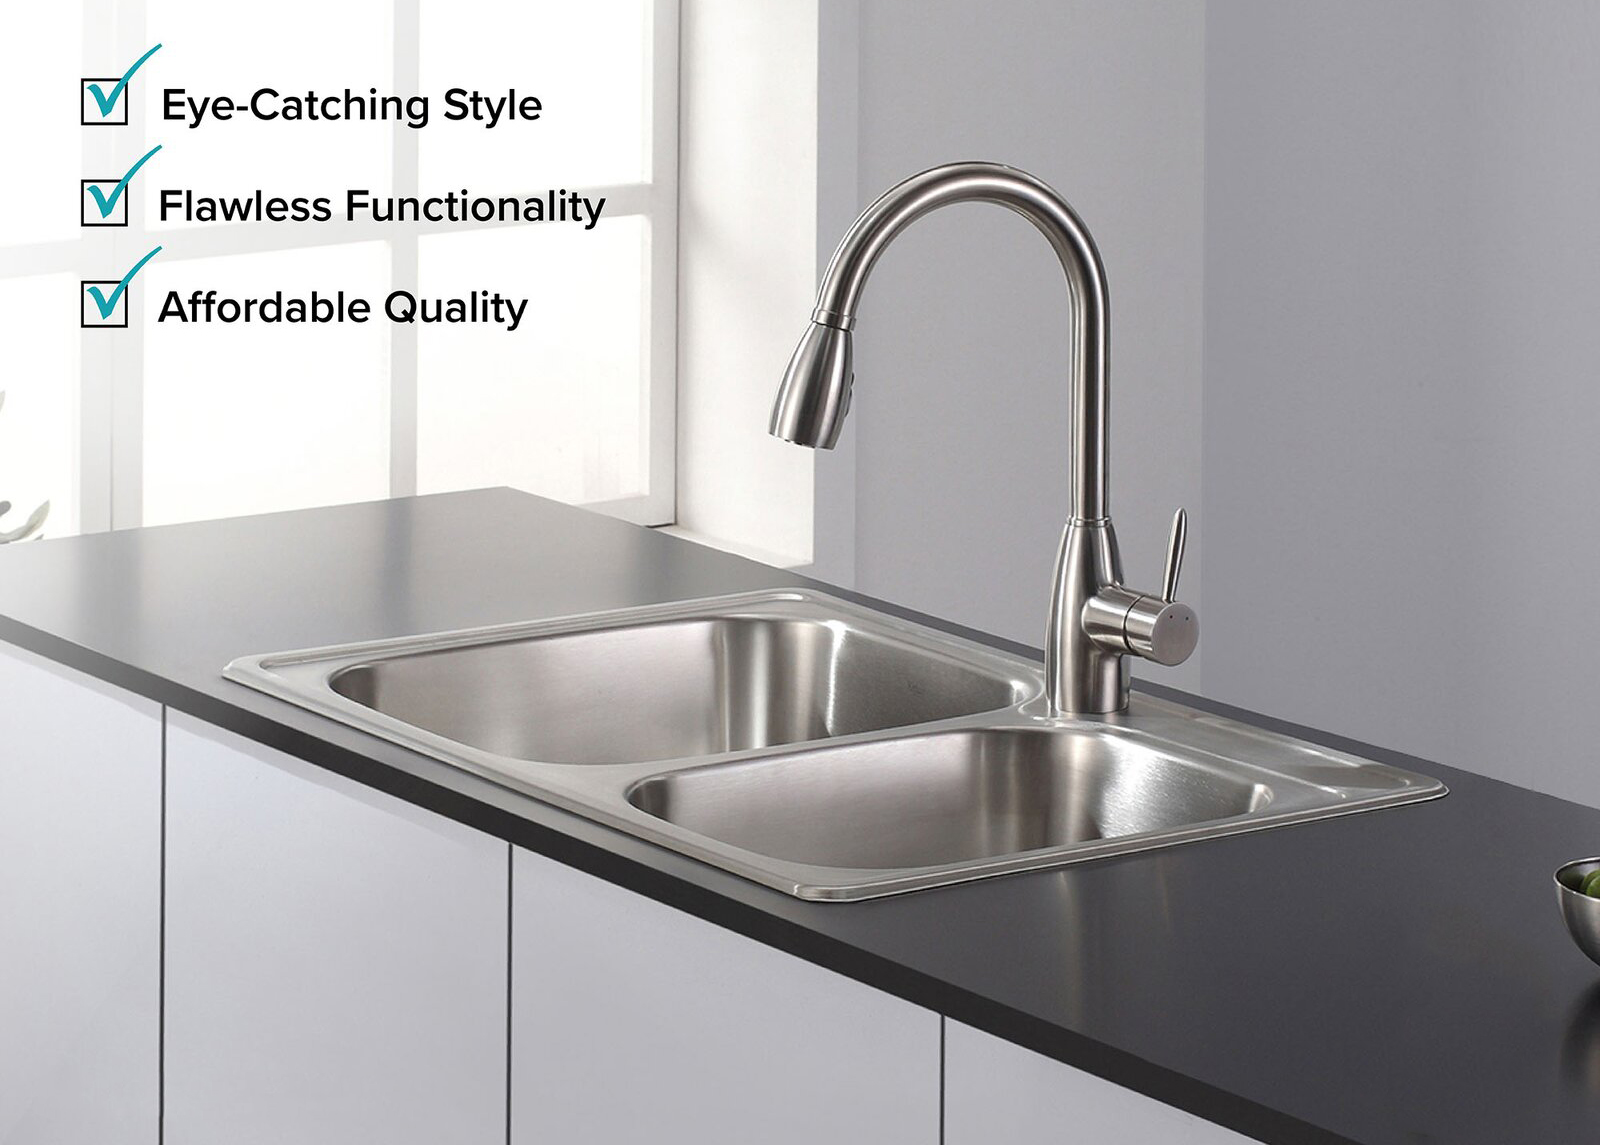 Pressed Stainless Steel Kitchen Sink Factory Good Price Double Bowl Undermount Kitchen Sinks With Accessories